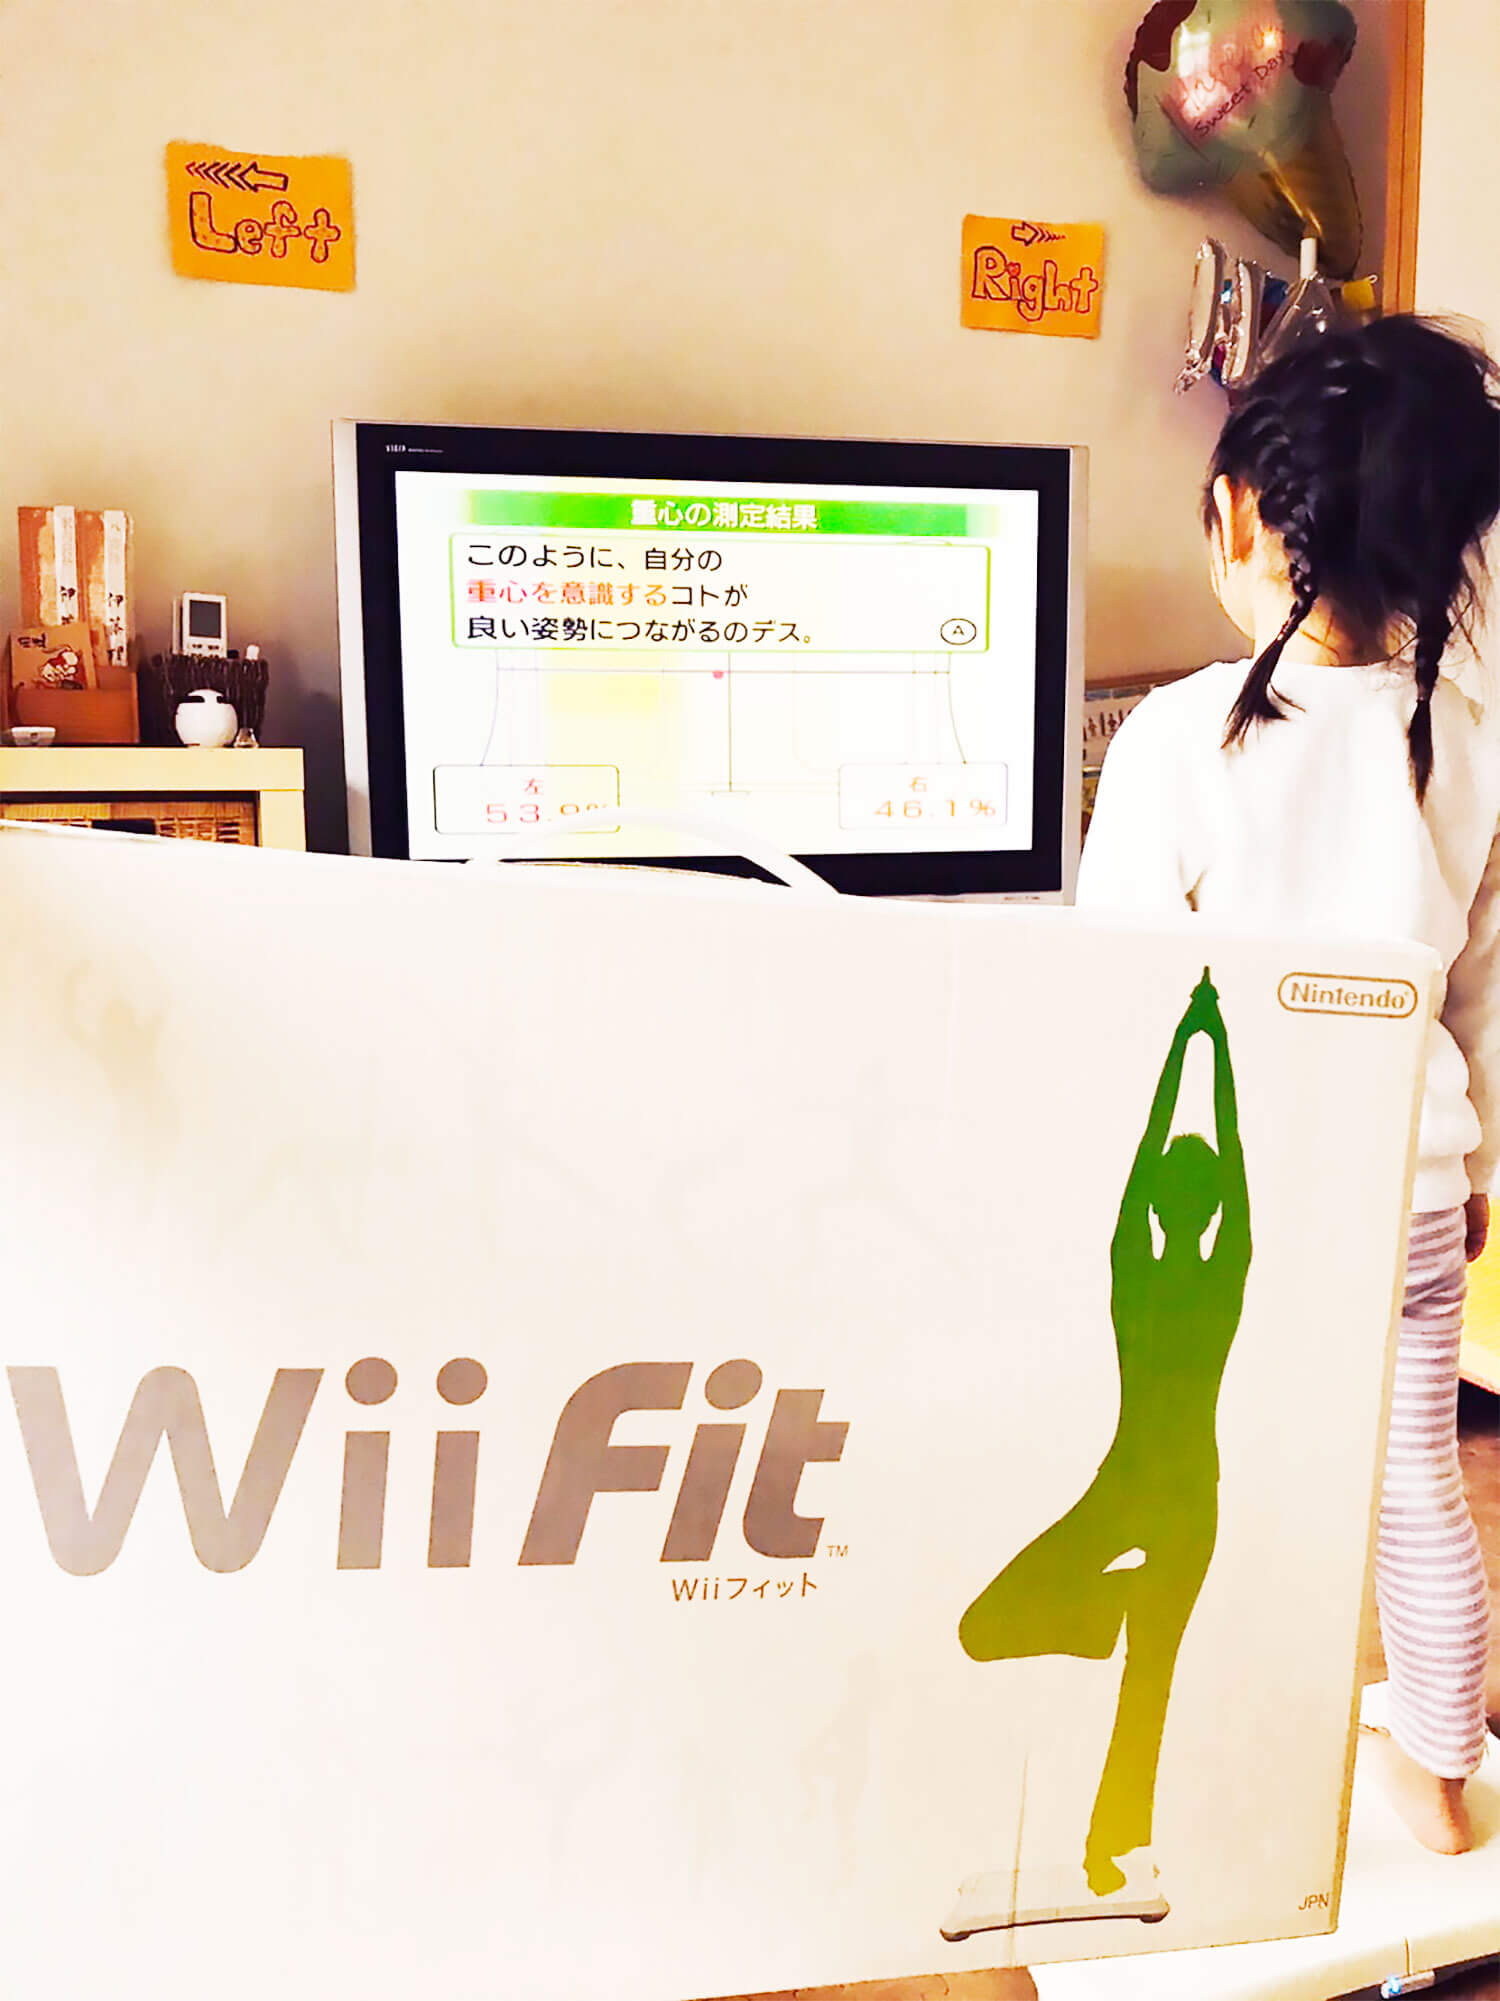 Wii Fit in Japan